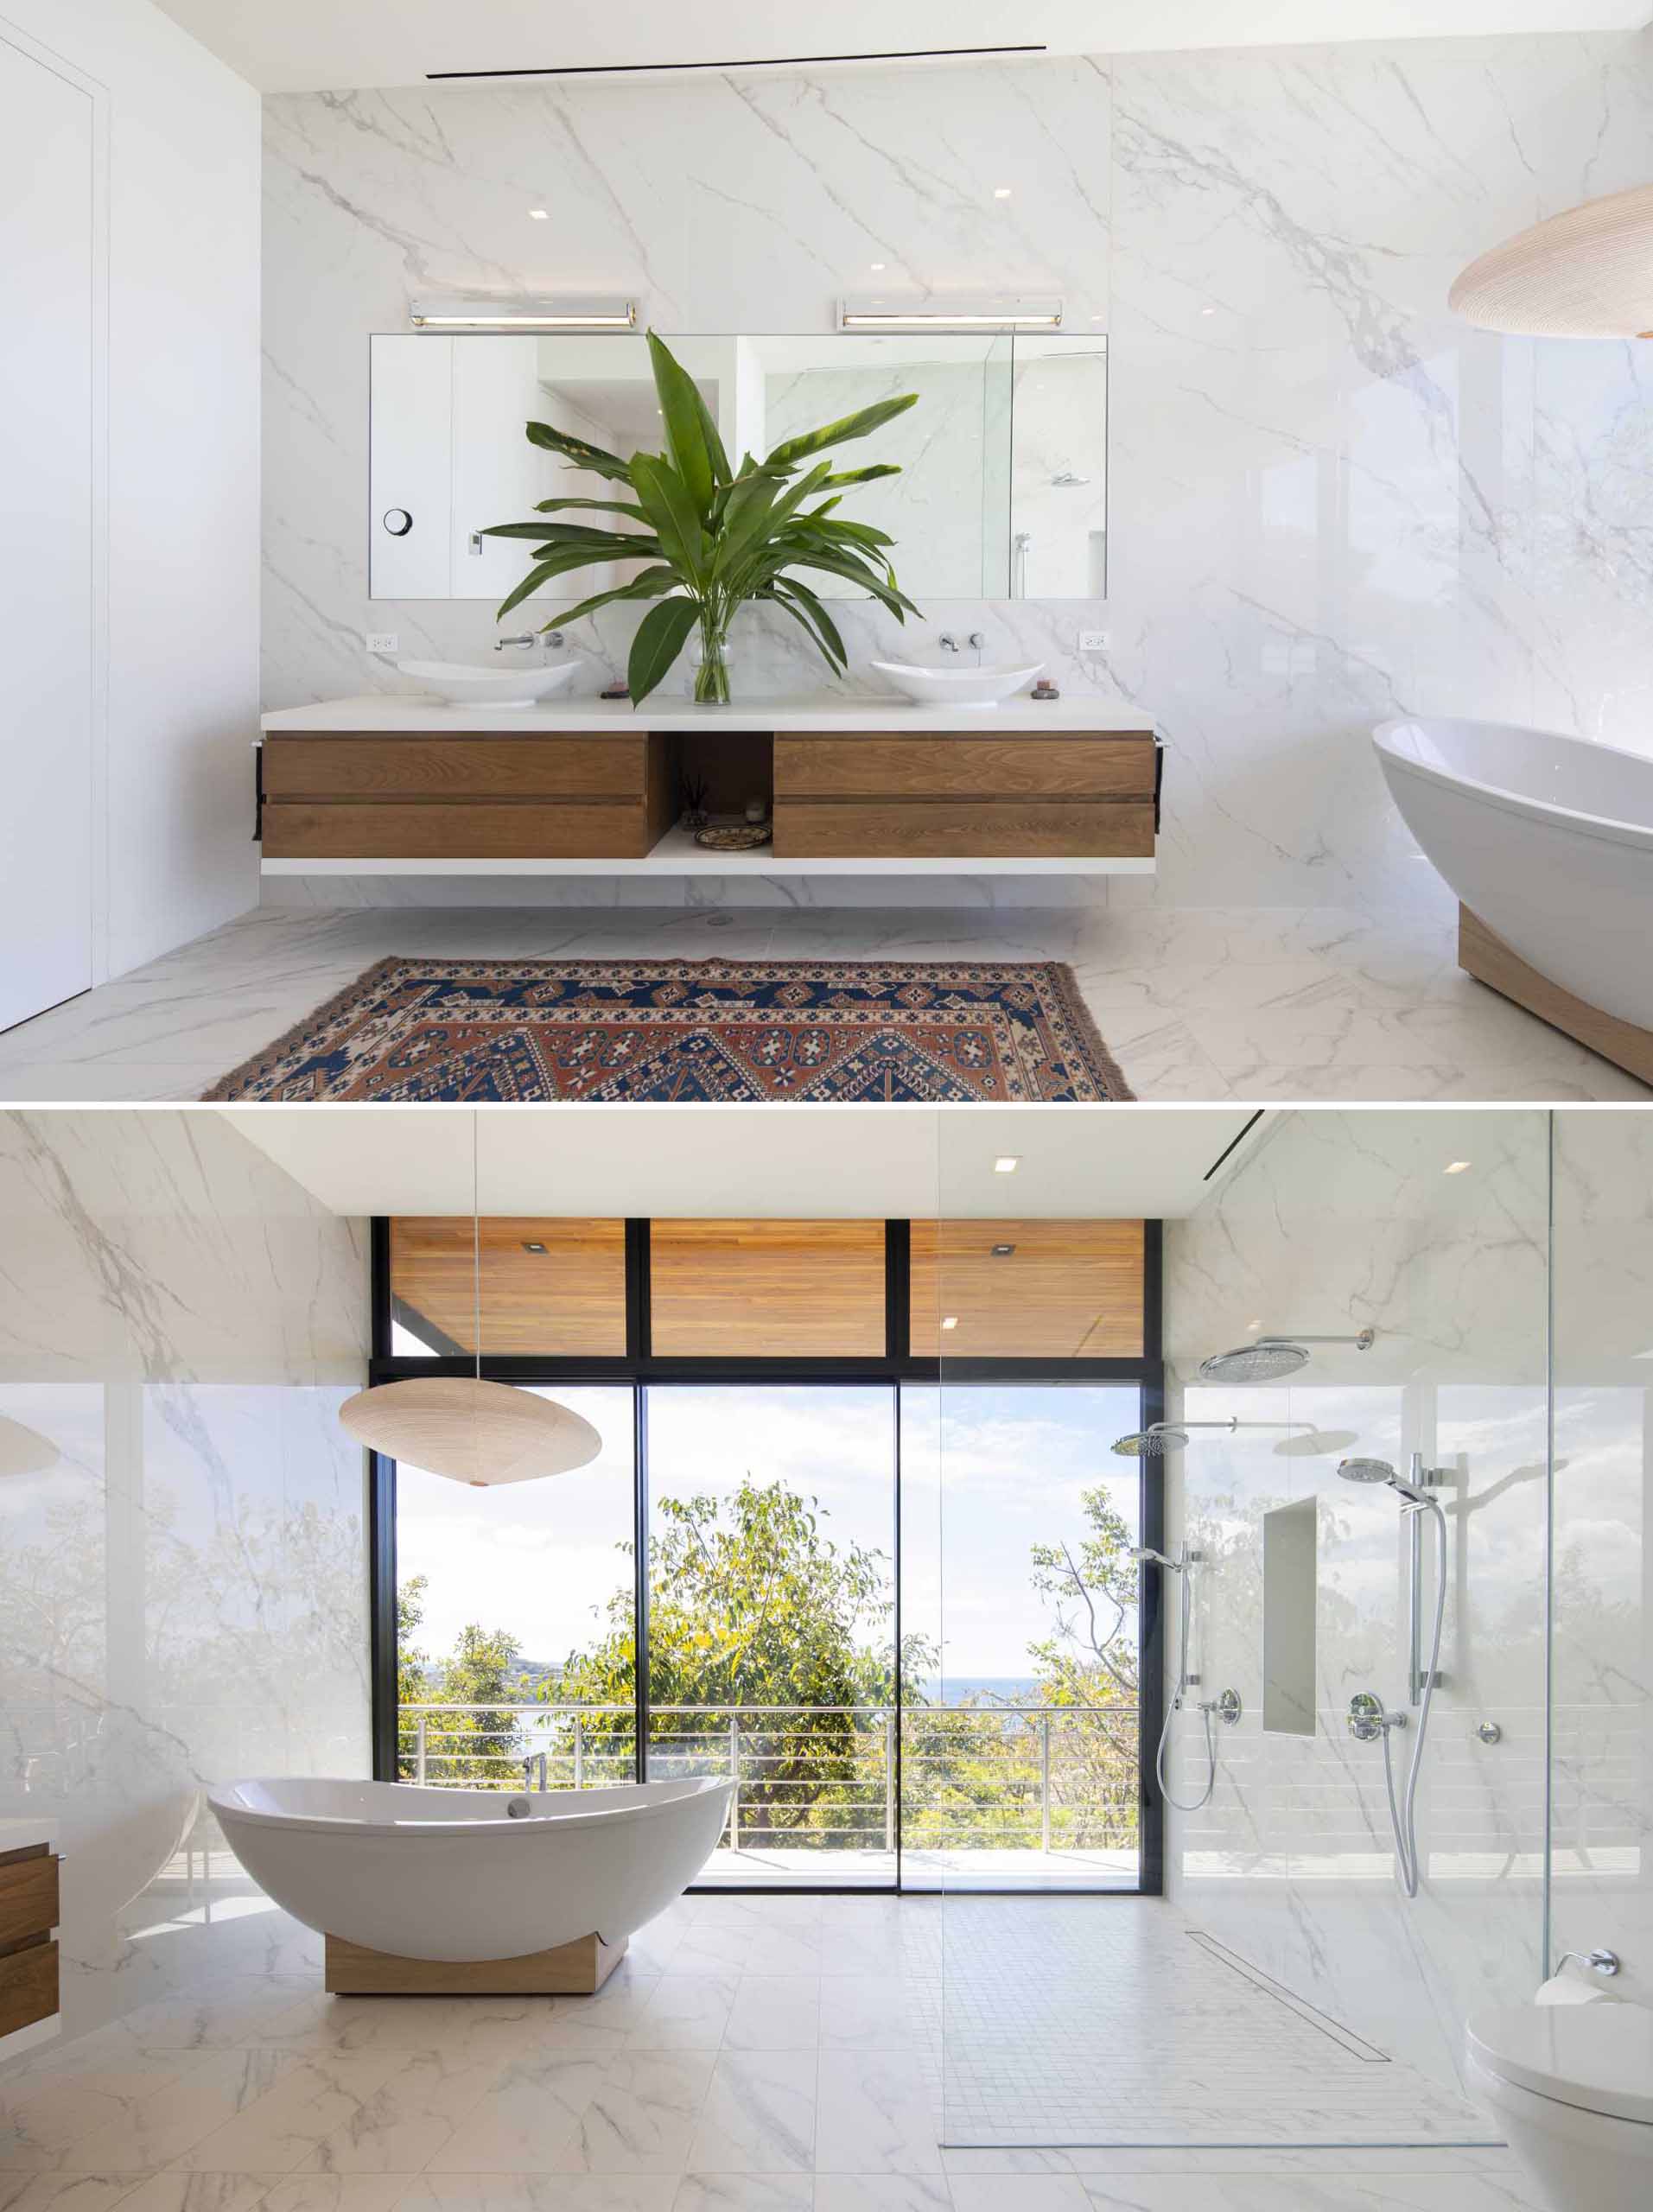 A contemporary bathroom design with a material color palette of wood, light colored tiles, white countertops, and glass.